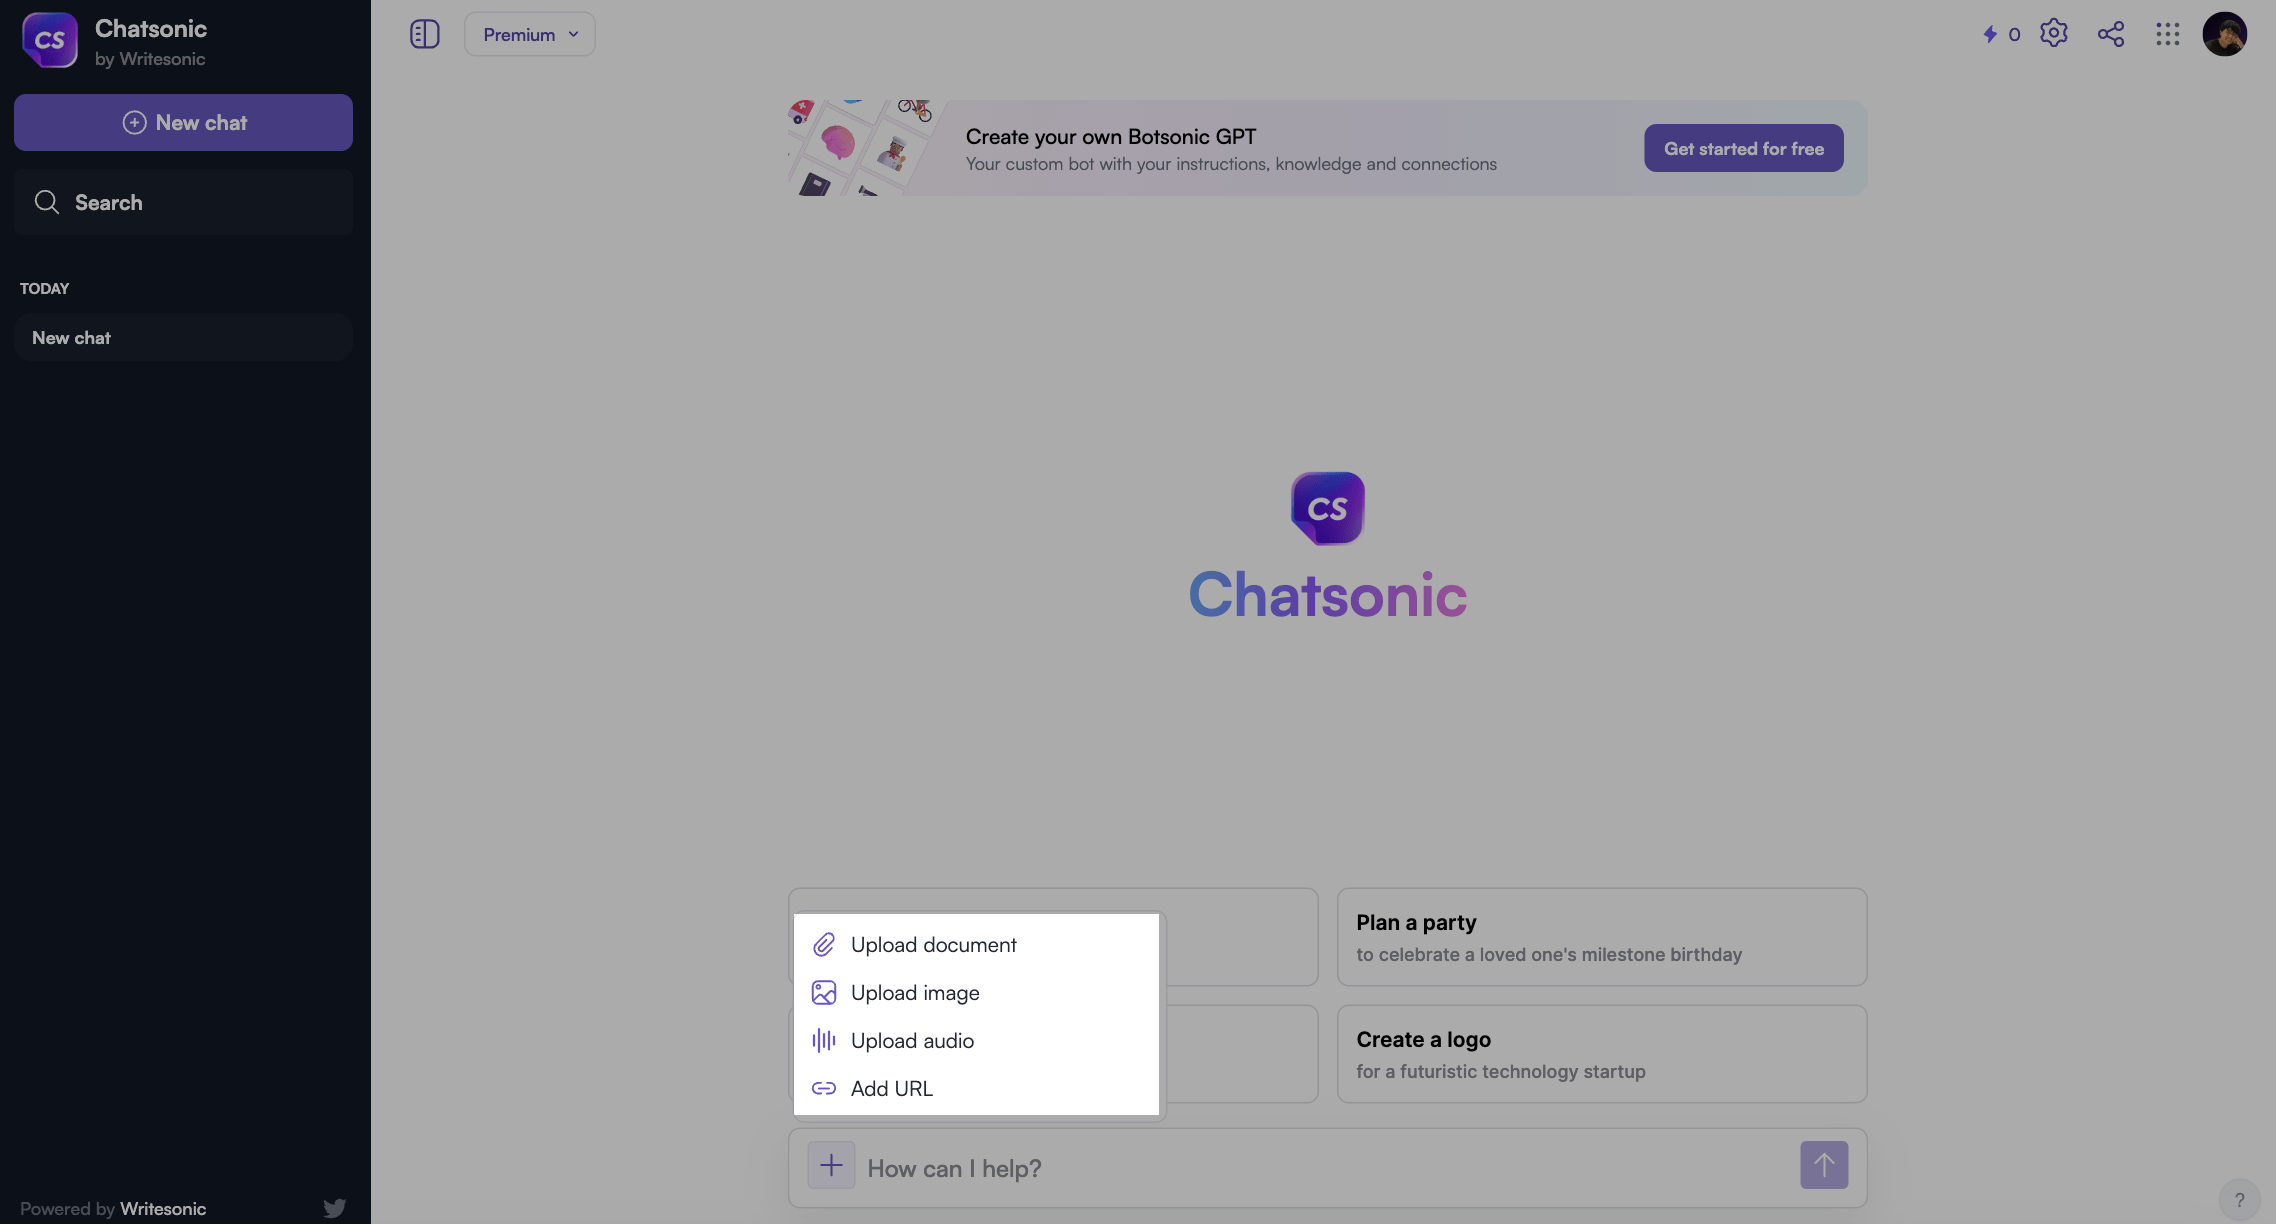 talk with chatsonic using audio, docs